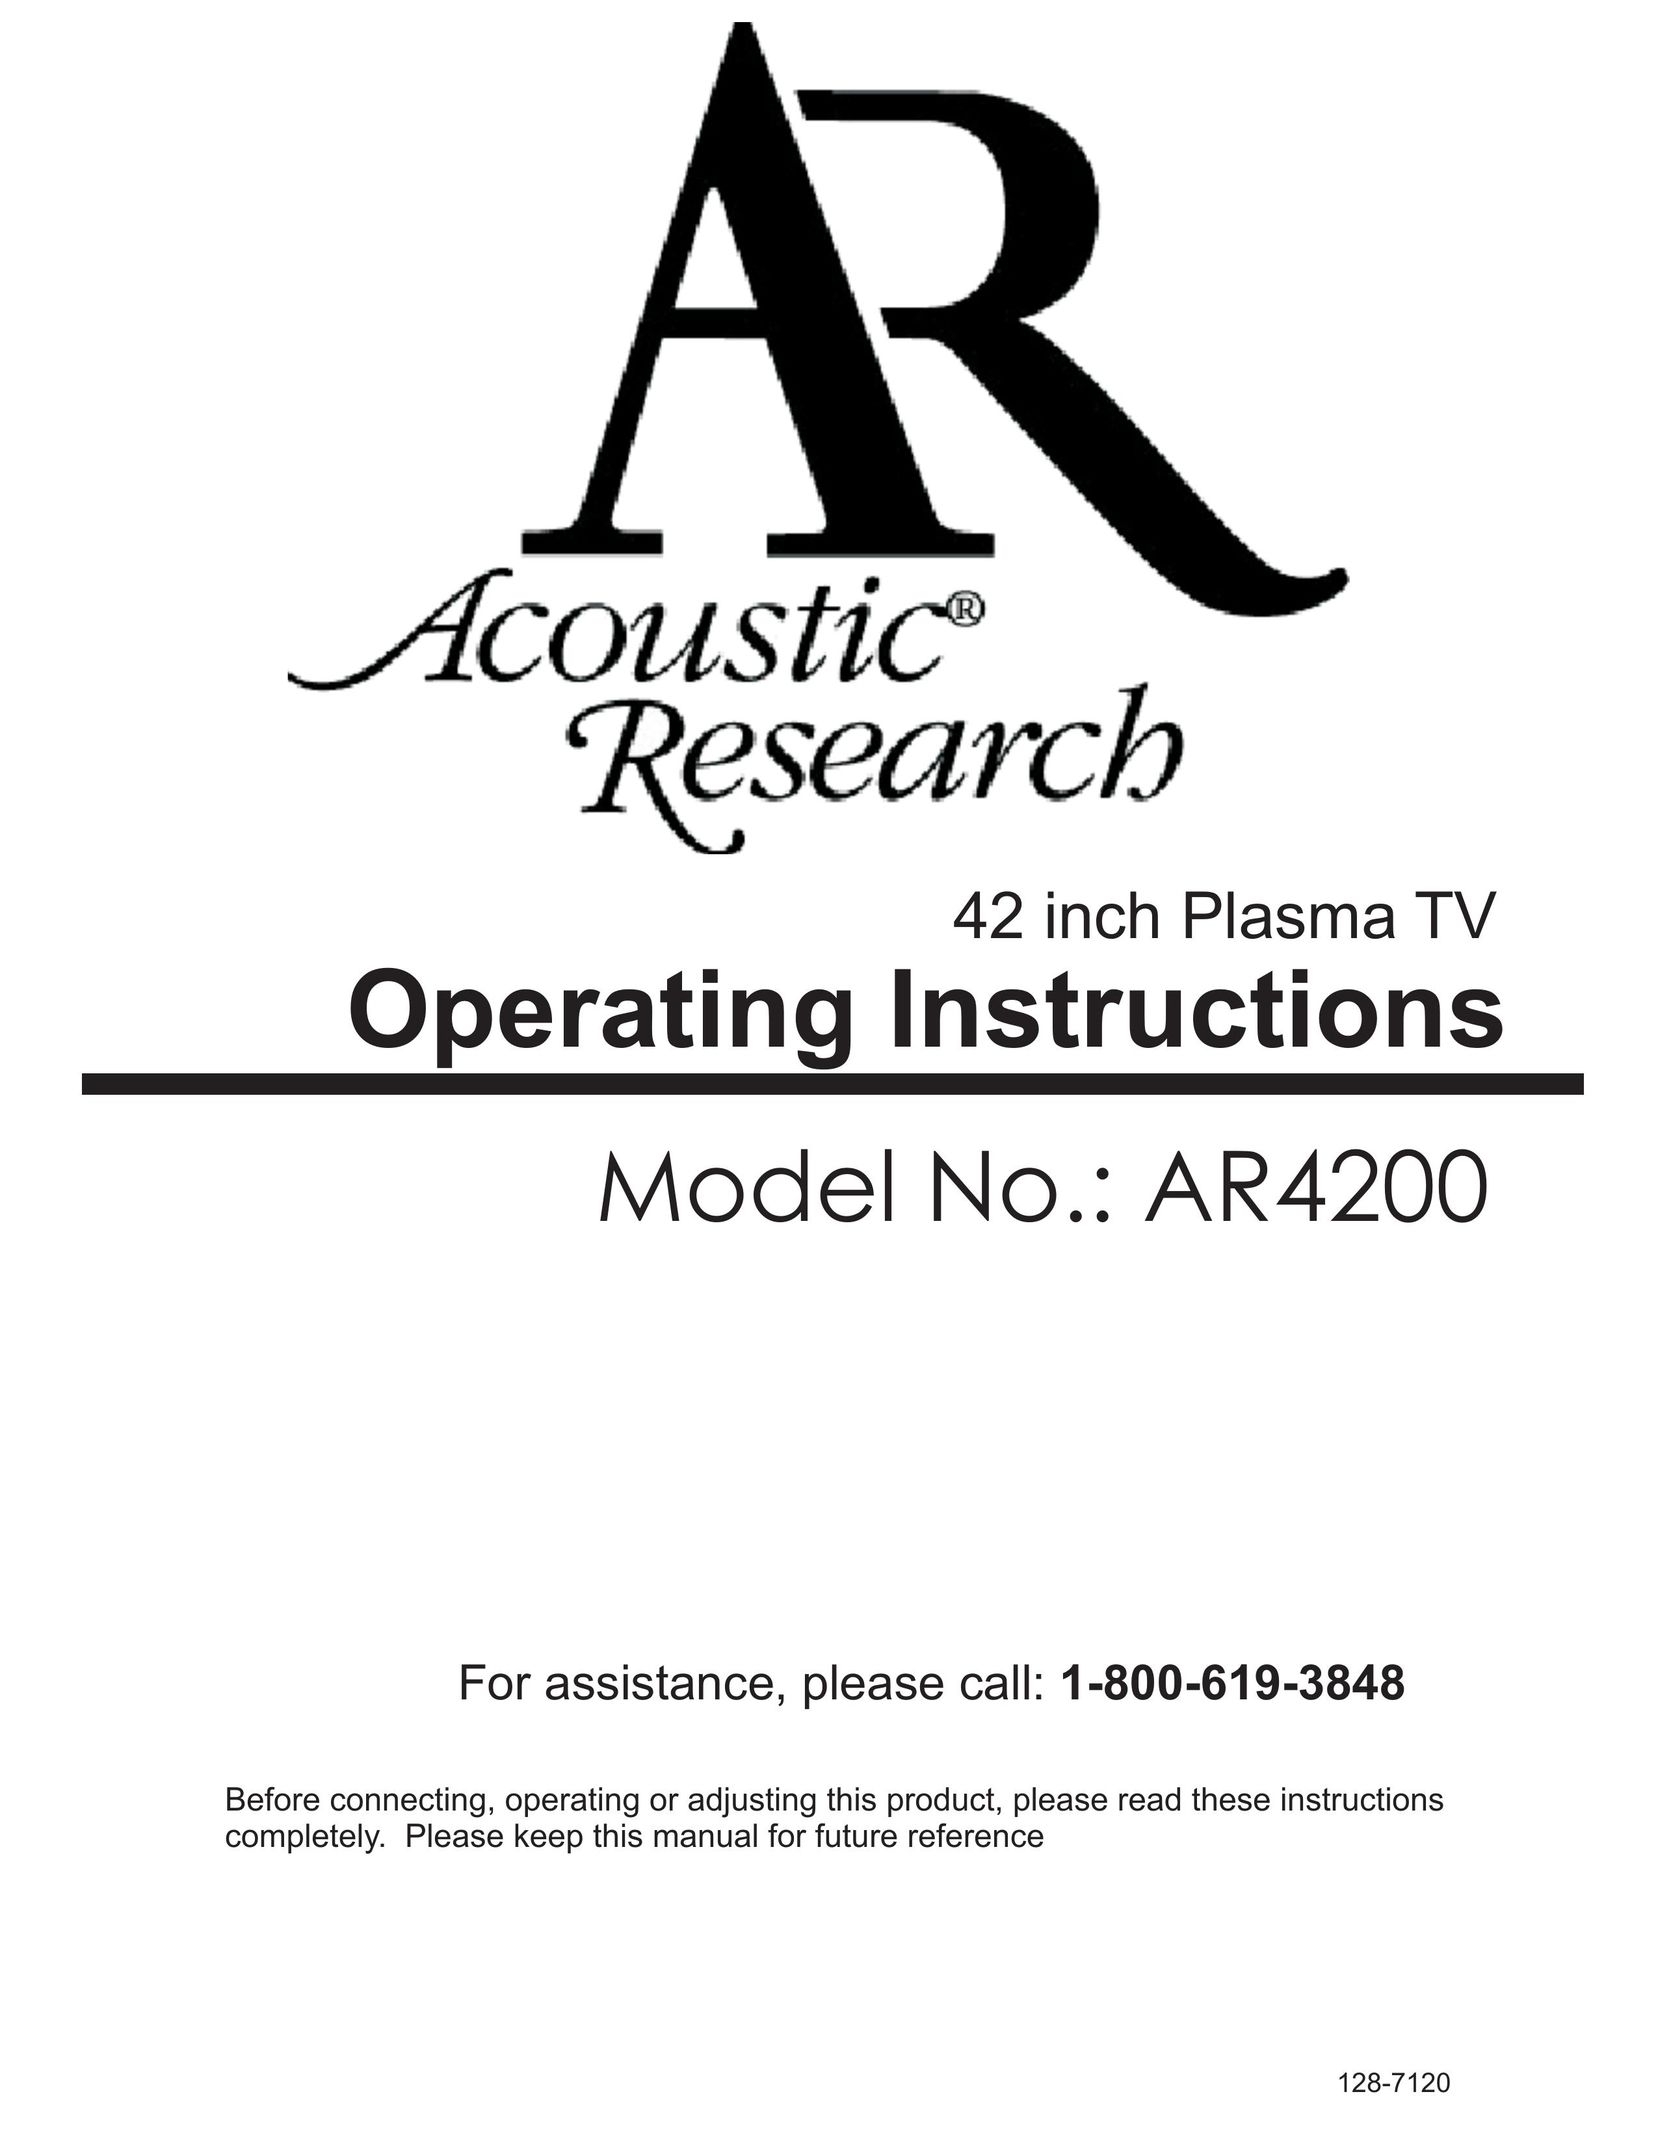 Acoustic Research AR4200 Flat Panel Television User Manual